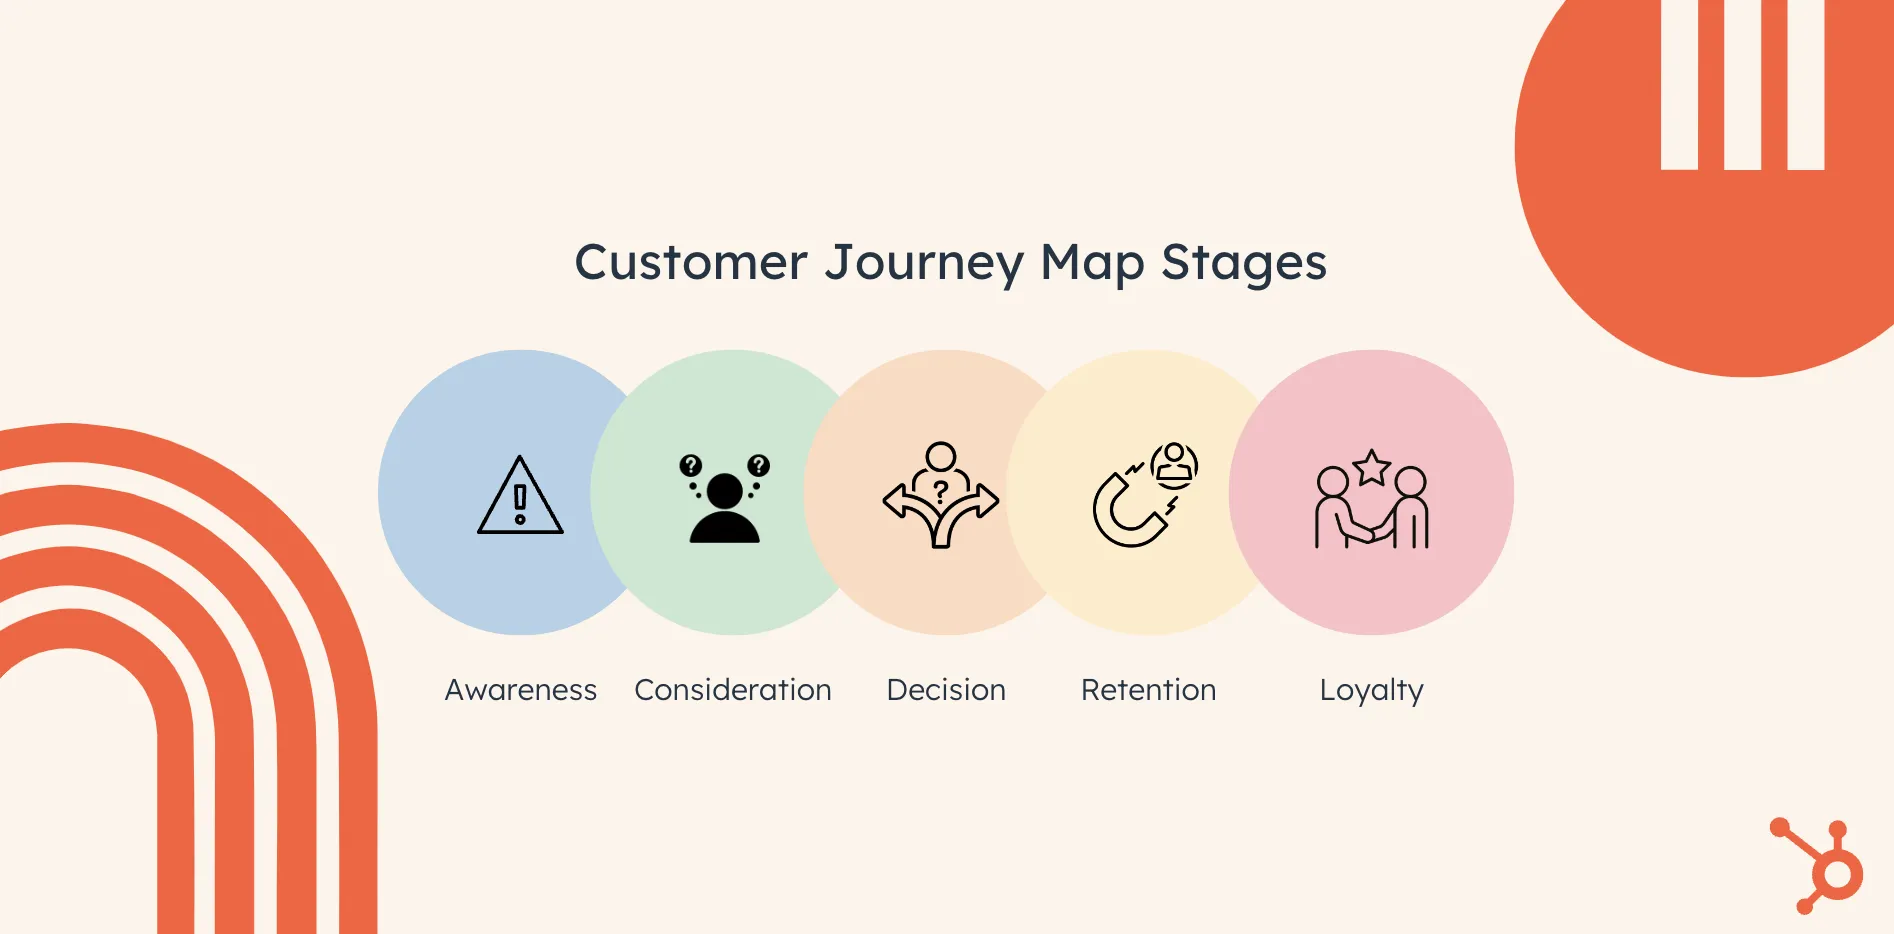 Customer journey stages to include to improve the customer journey experience